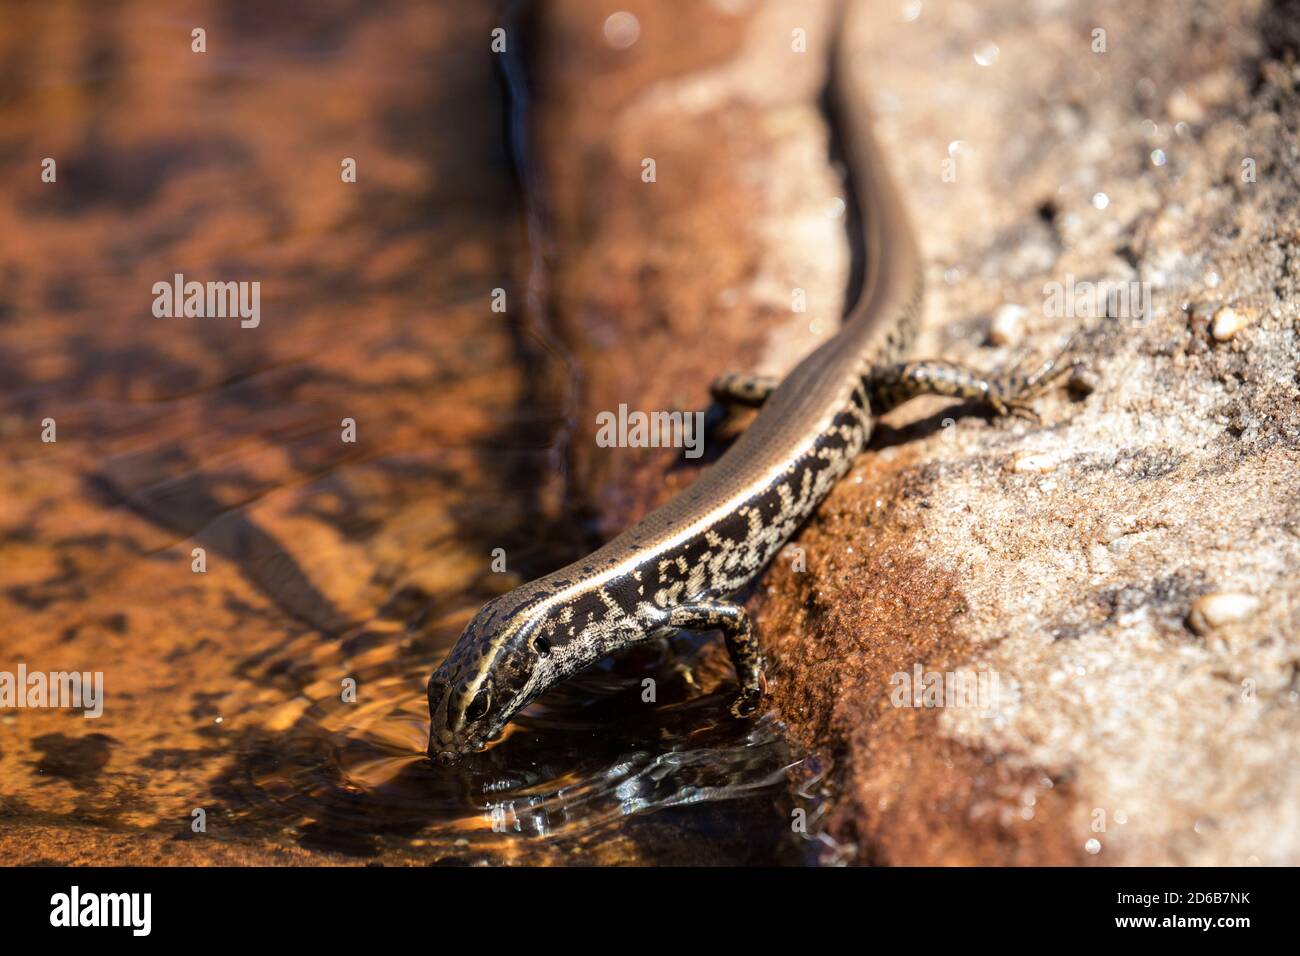 Eastern Water Skink searching and feeding on frogs eggs Stock Photo